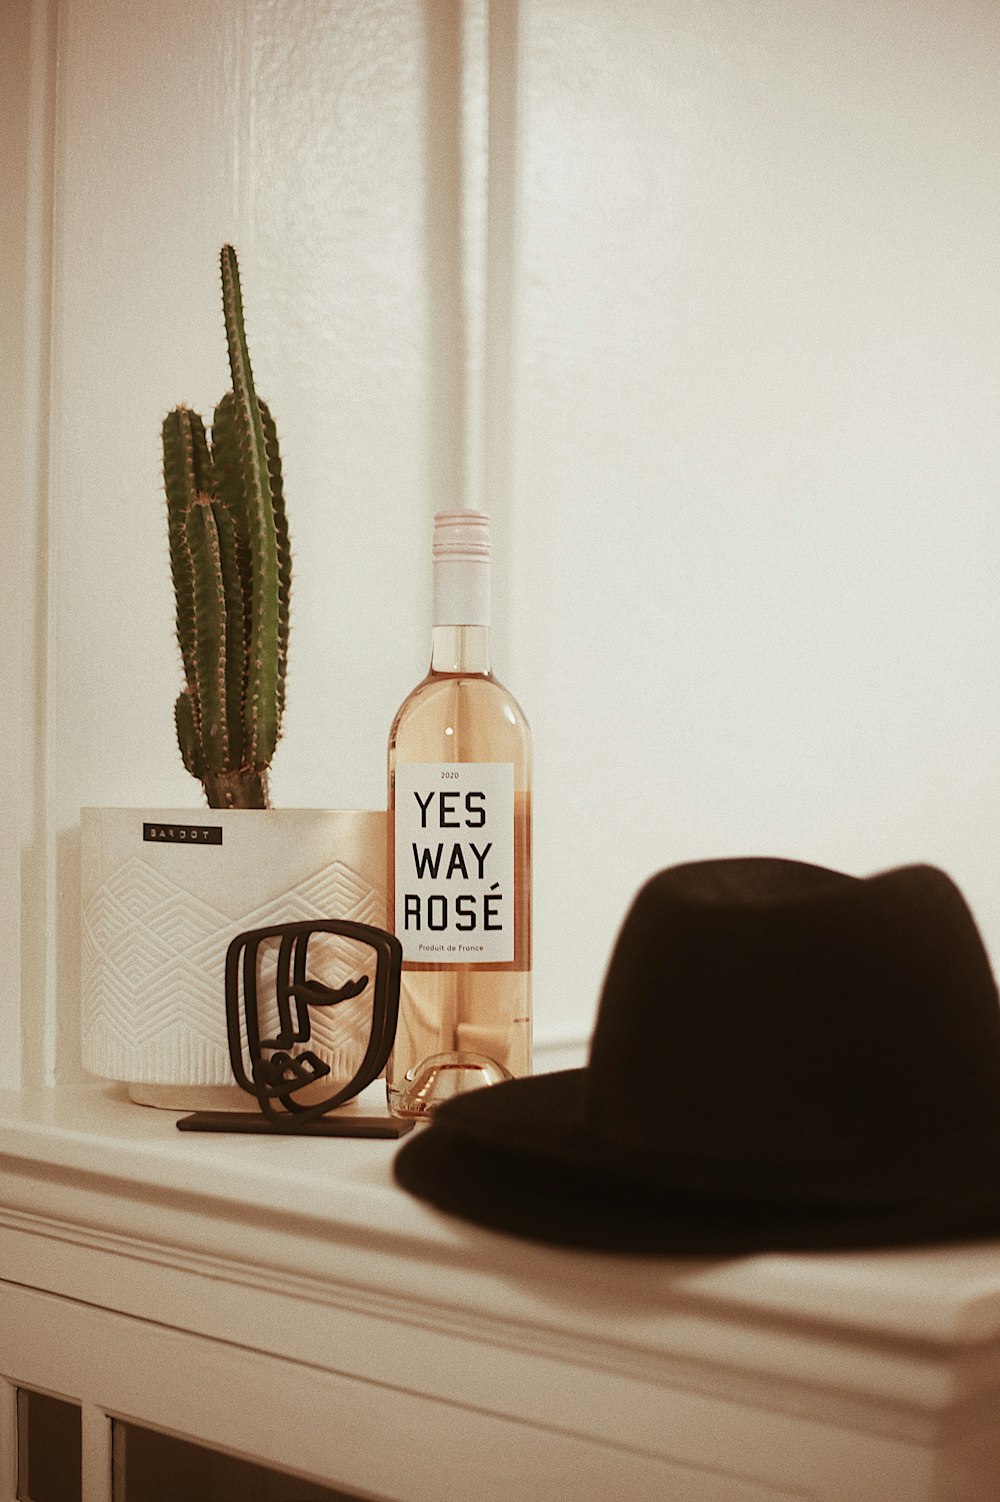 a bottle of booze next to a hat and glasses